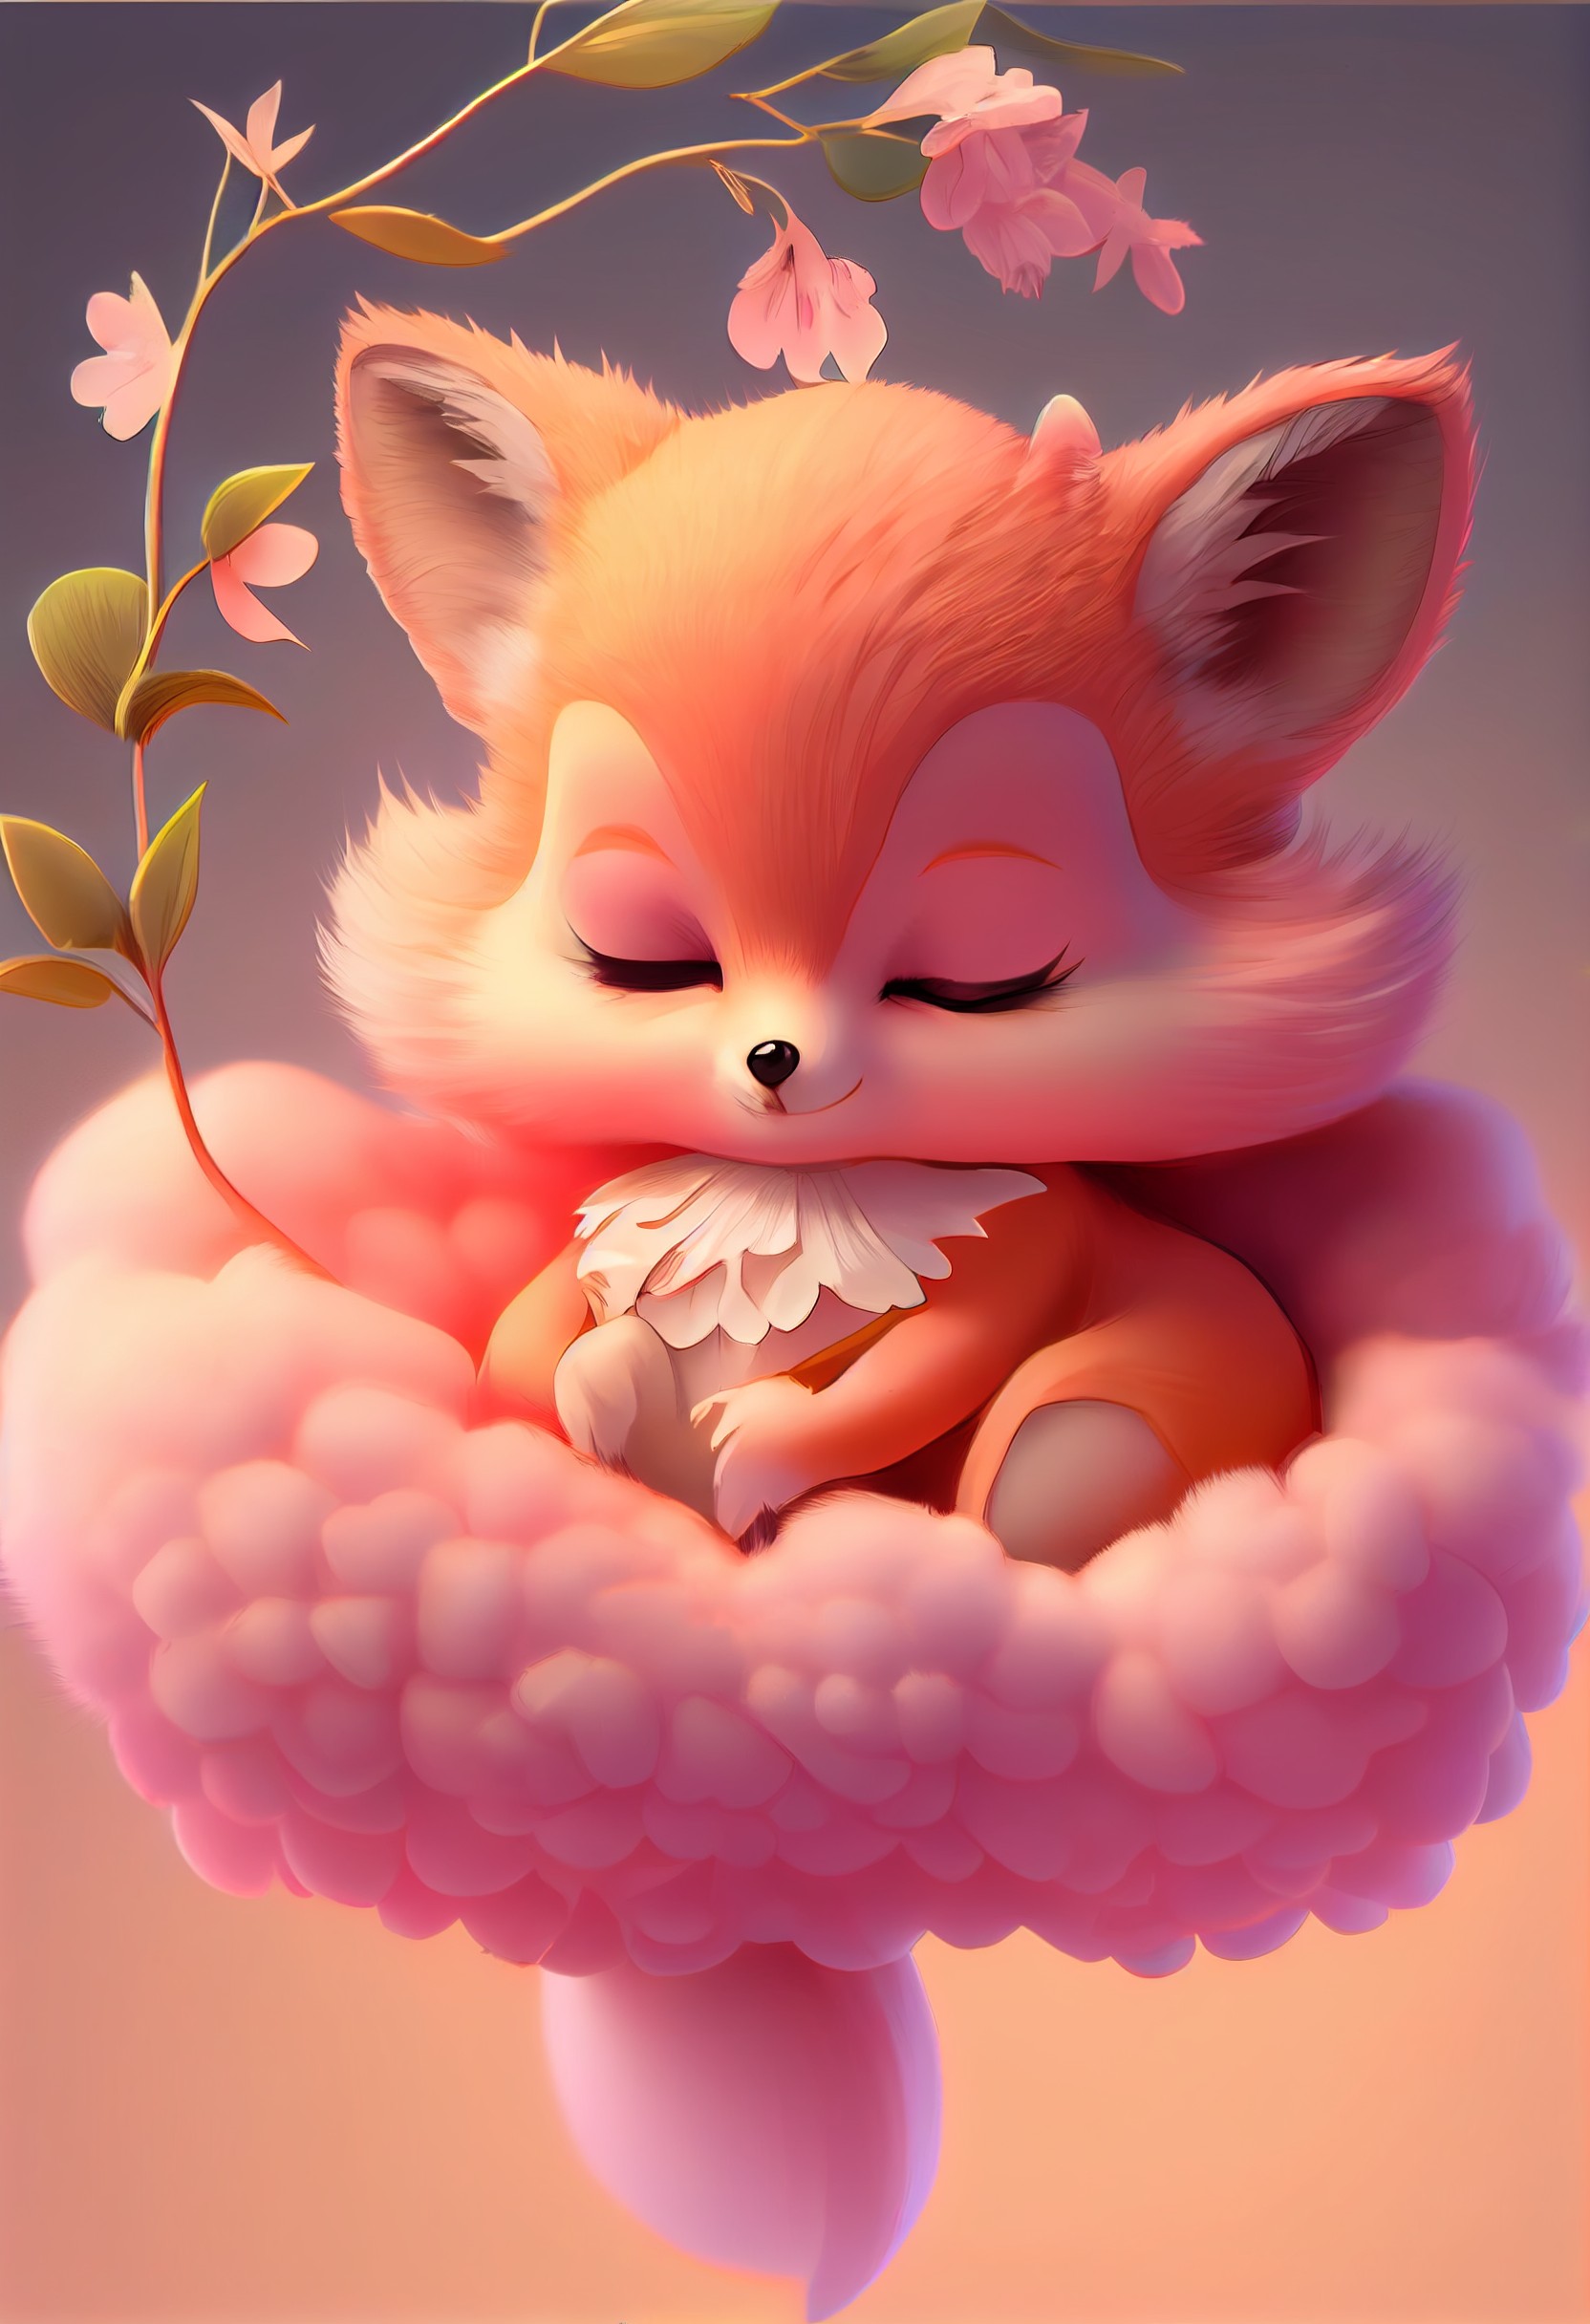 6 images of cute little pink furry fox by Midjourney